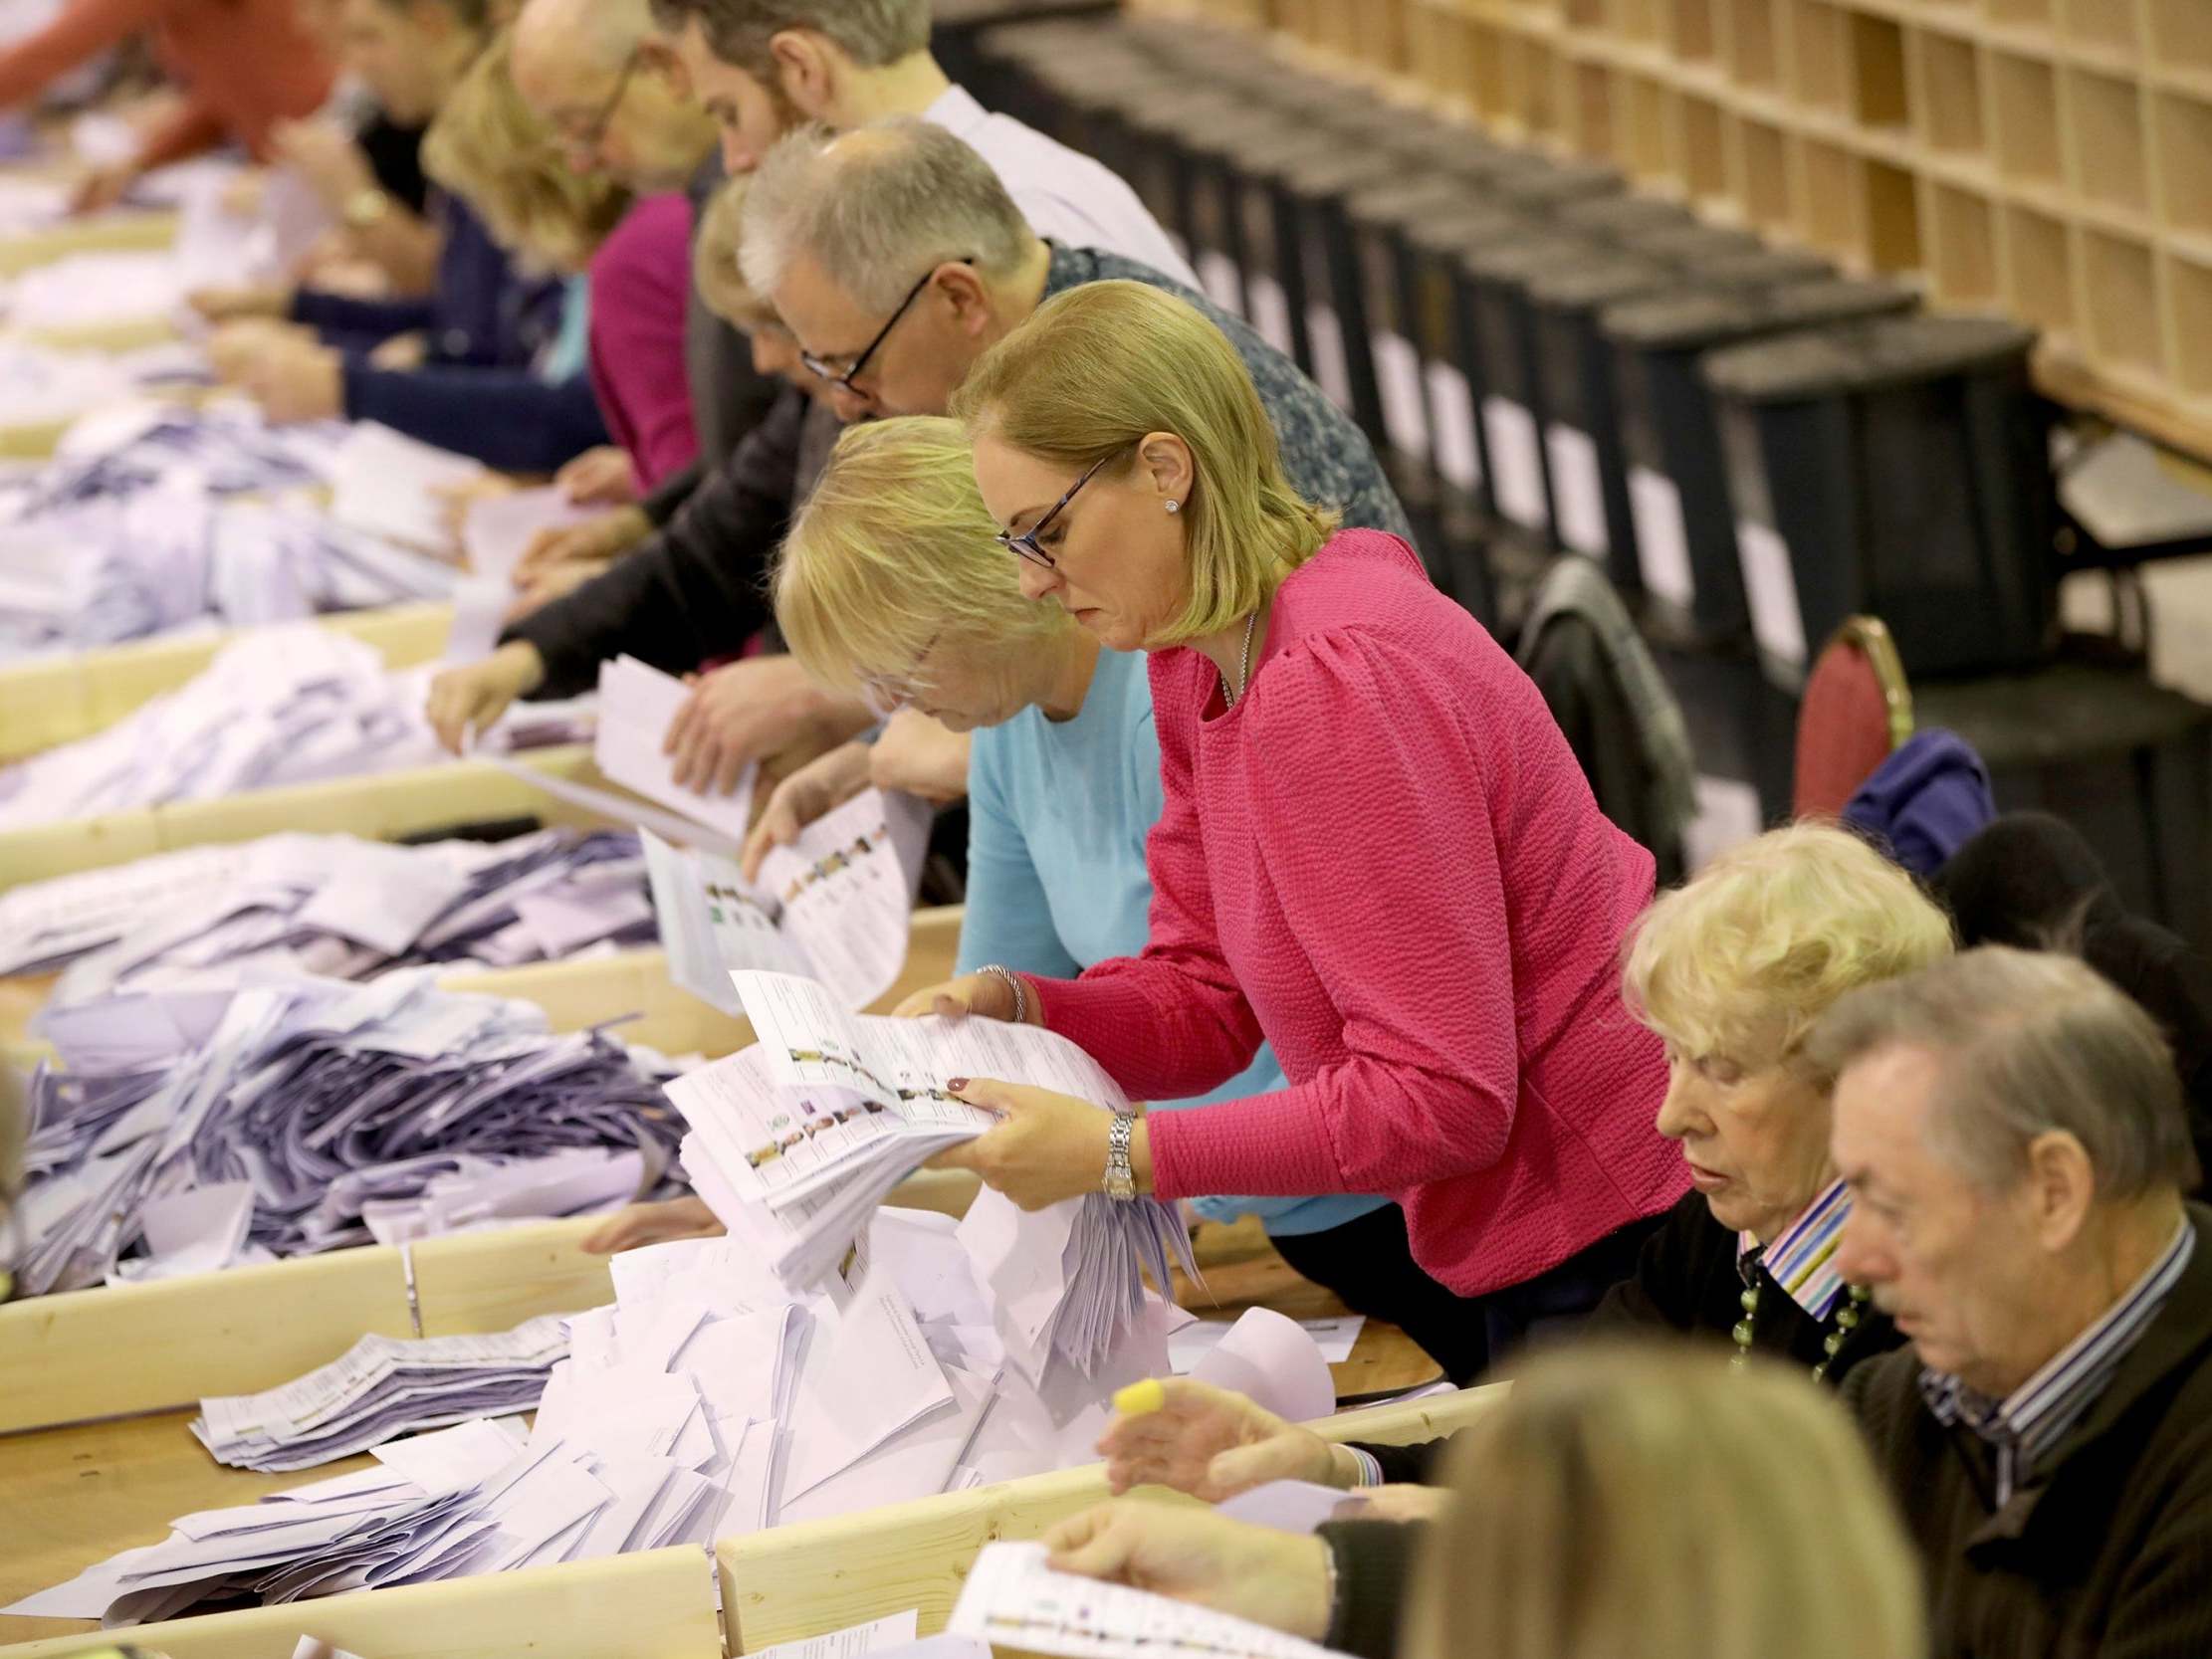 Ireland election: Sinn Fein set to win record number of seats with three-way race on knife edge